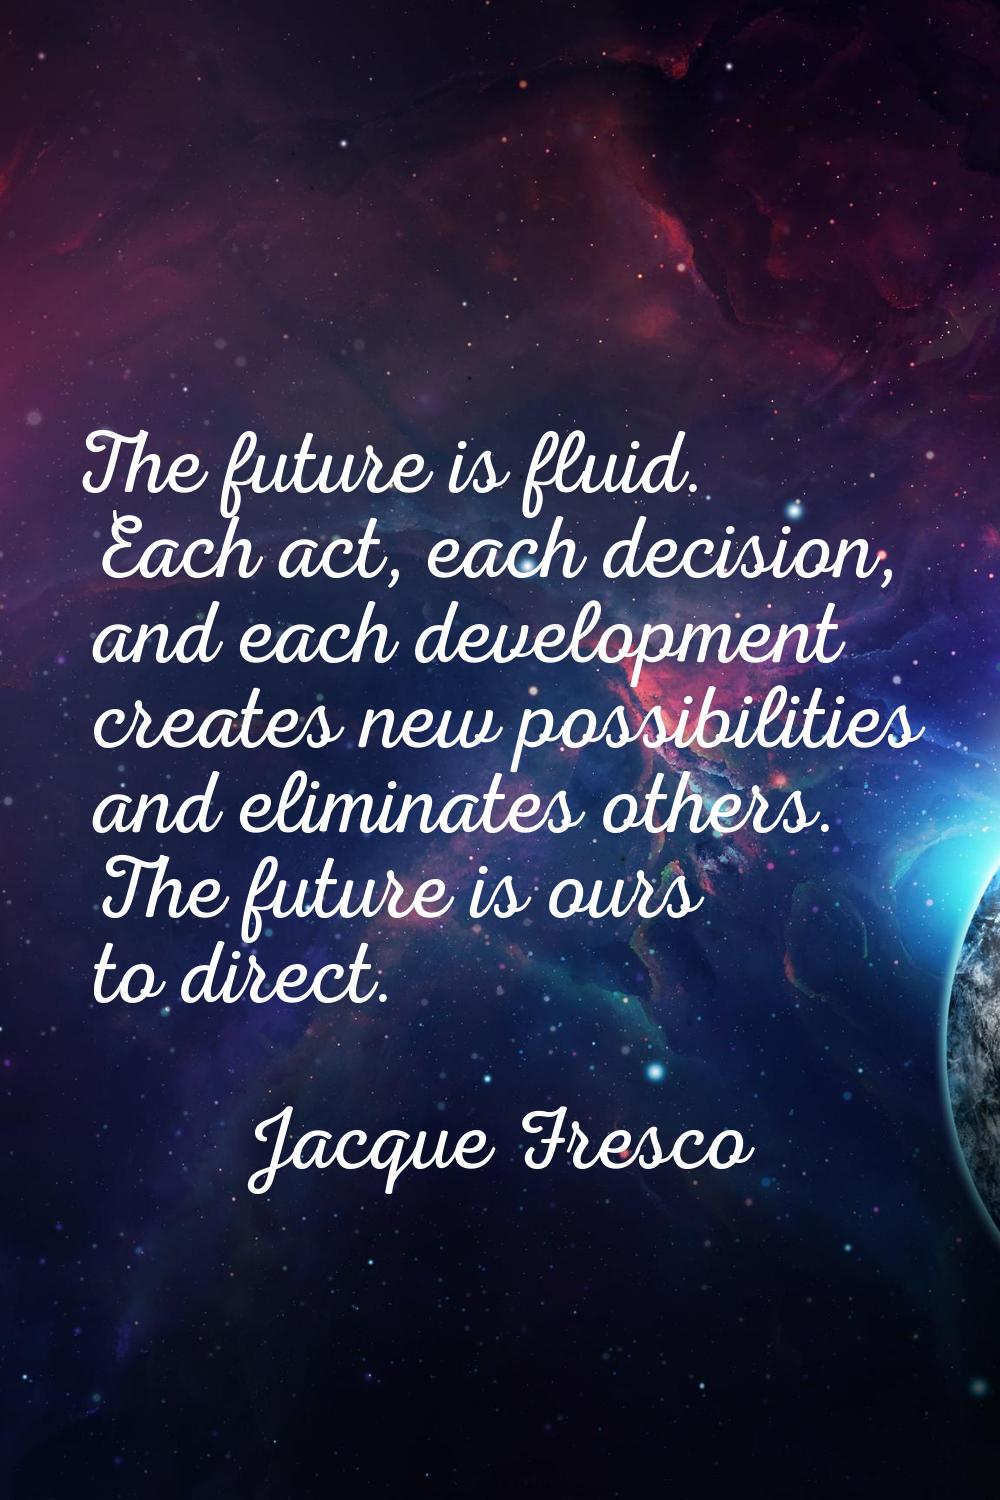 The future is fluid. Each act, each decision, and each development creates new possibilities and el